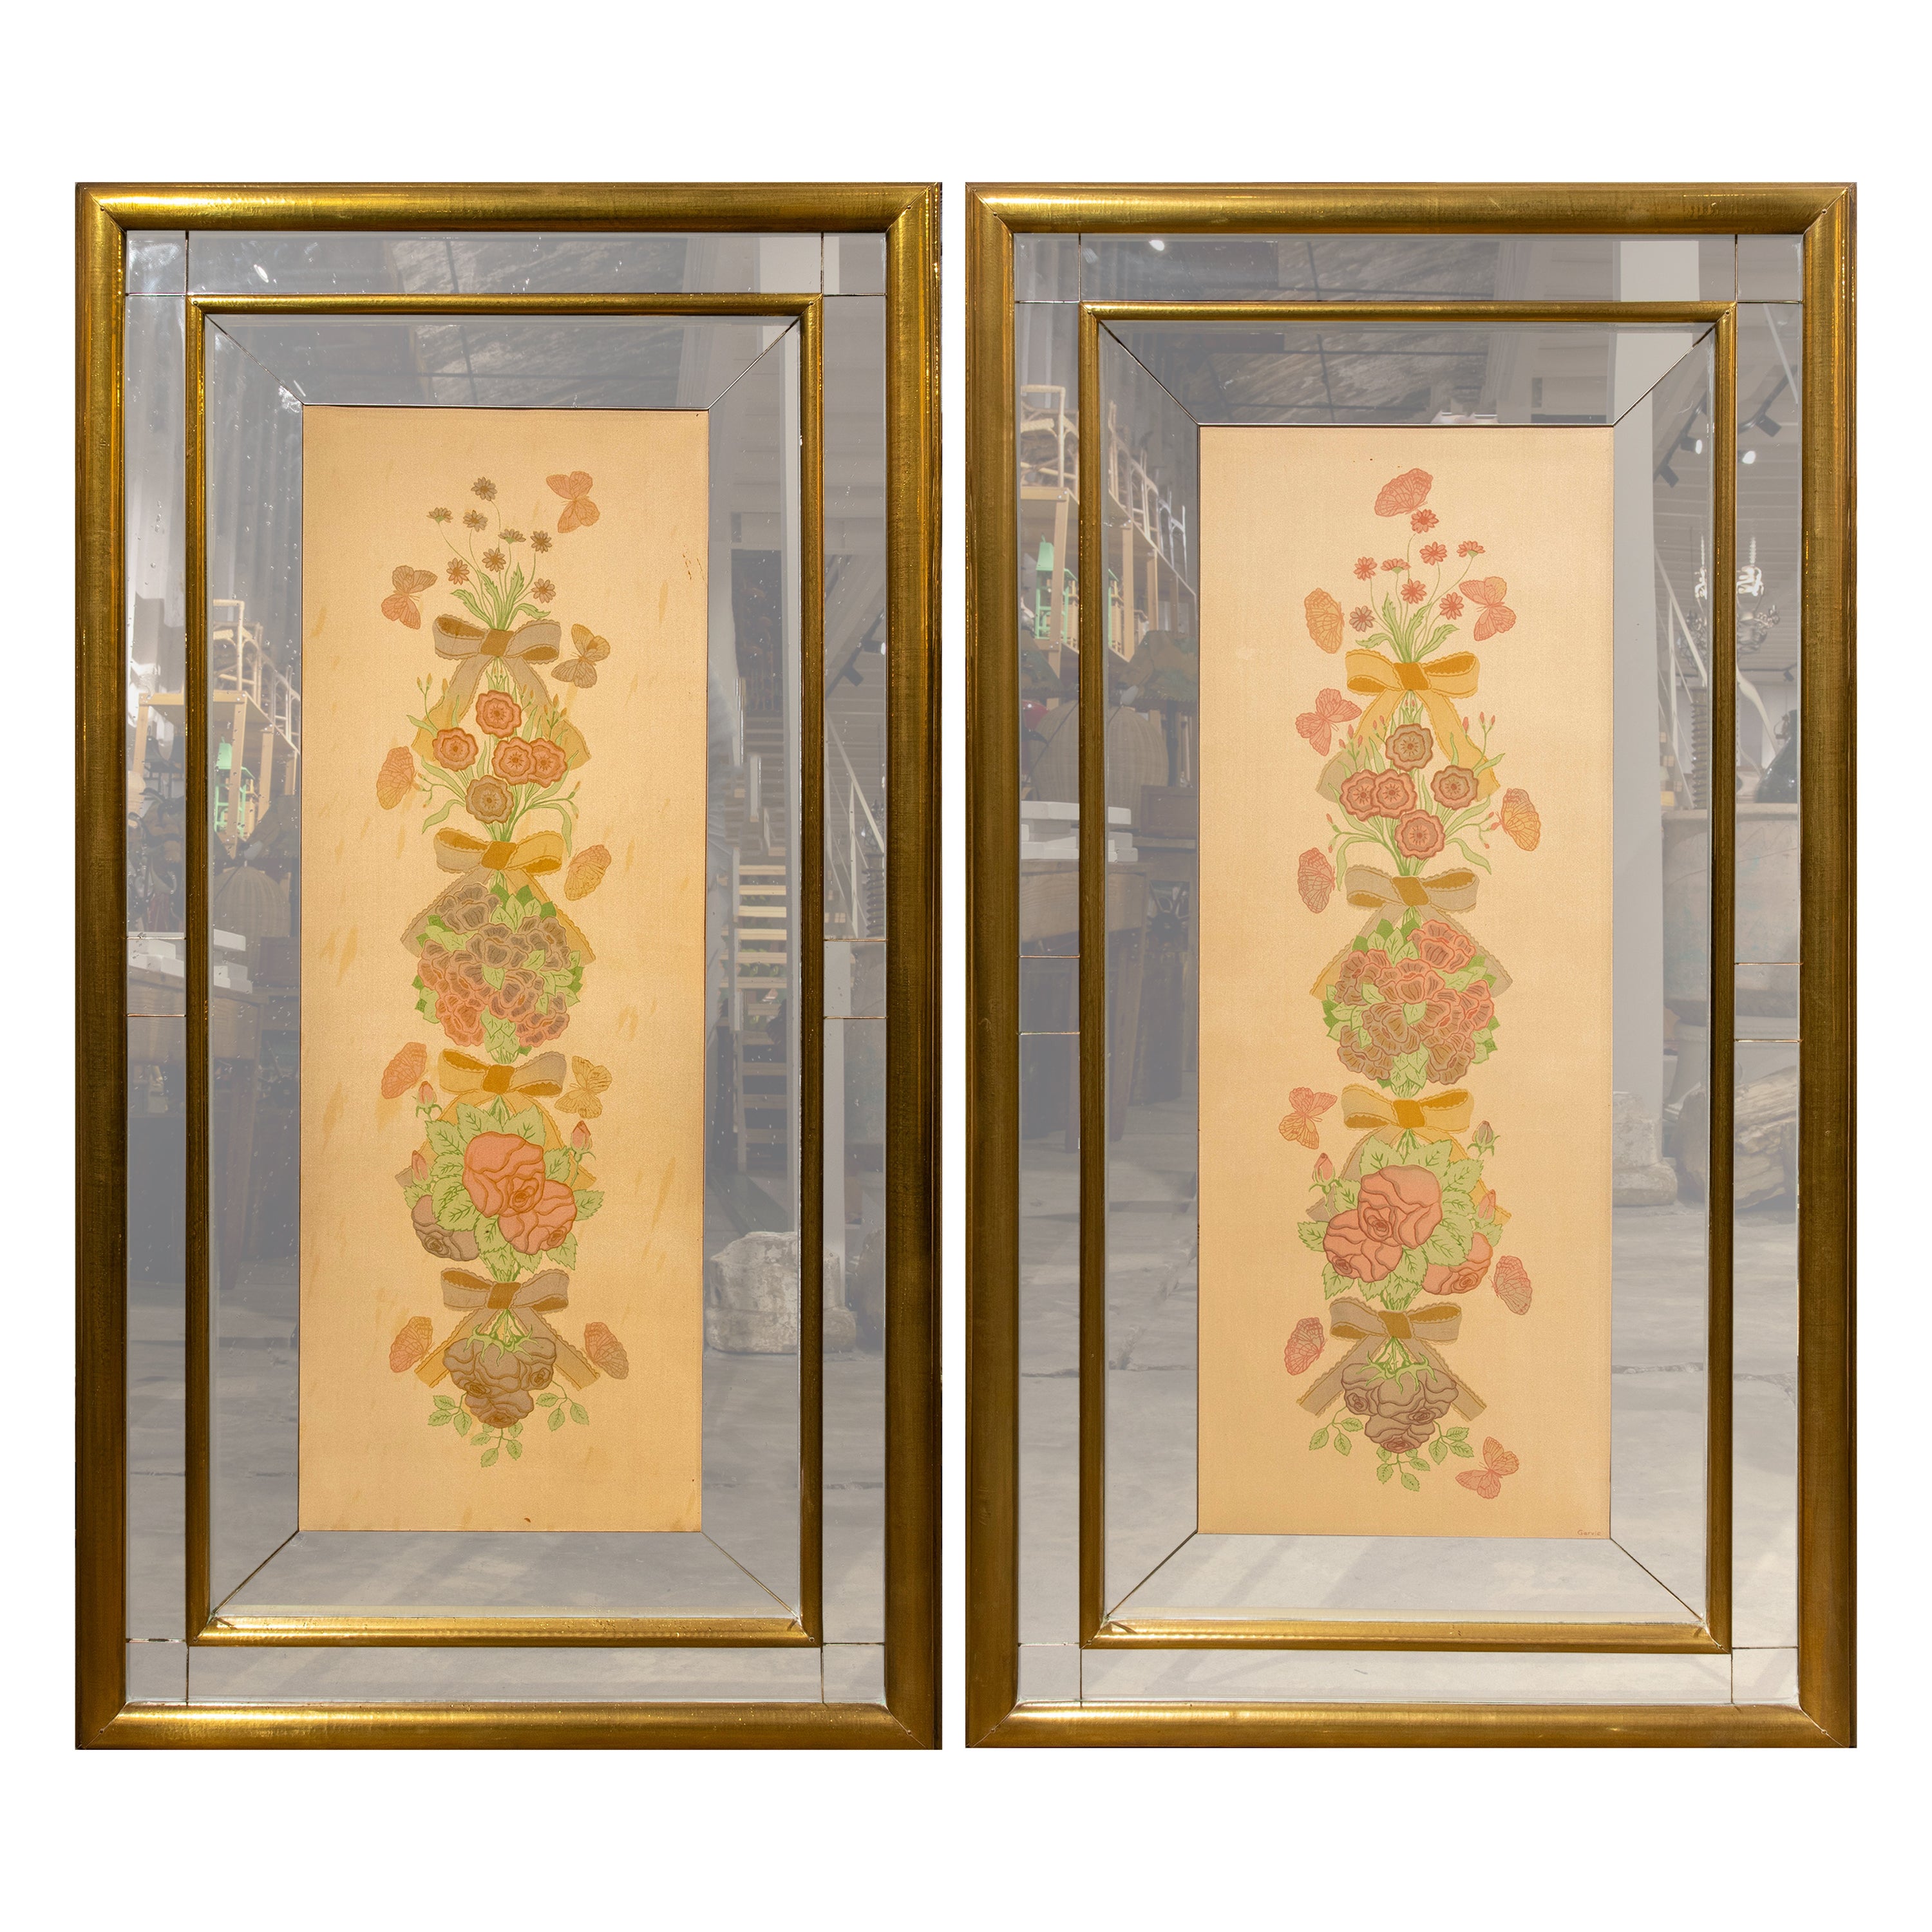 1970s, Pair of Hand-Painted Flower Paintings on Silk with Brass Plated Frames